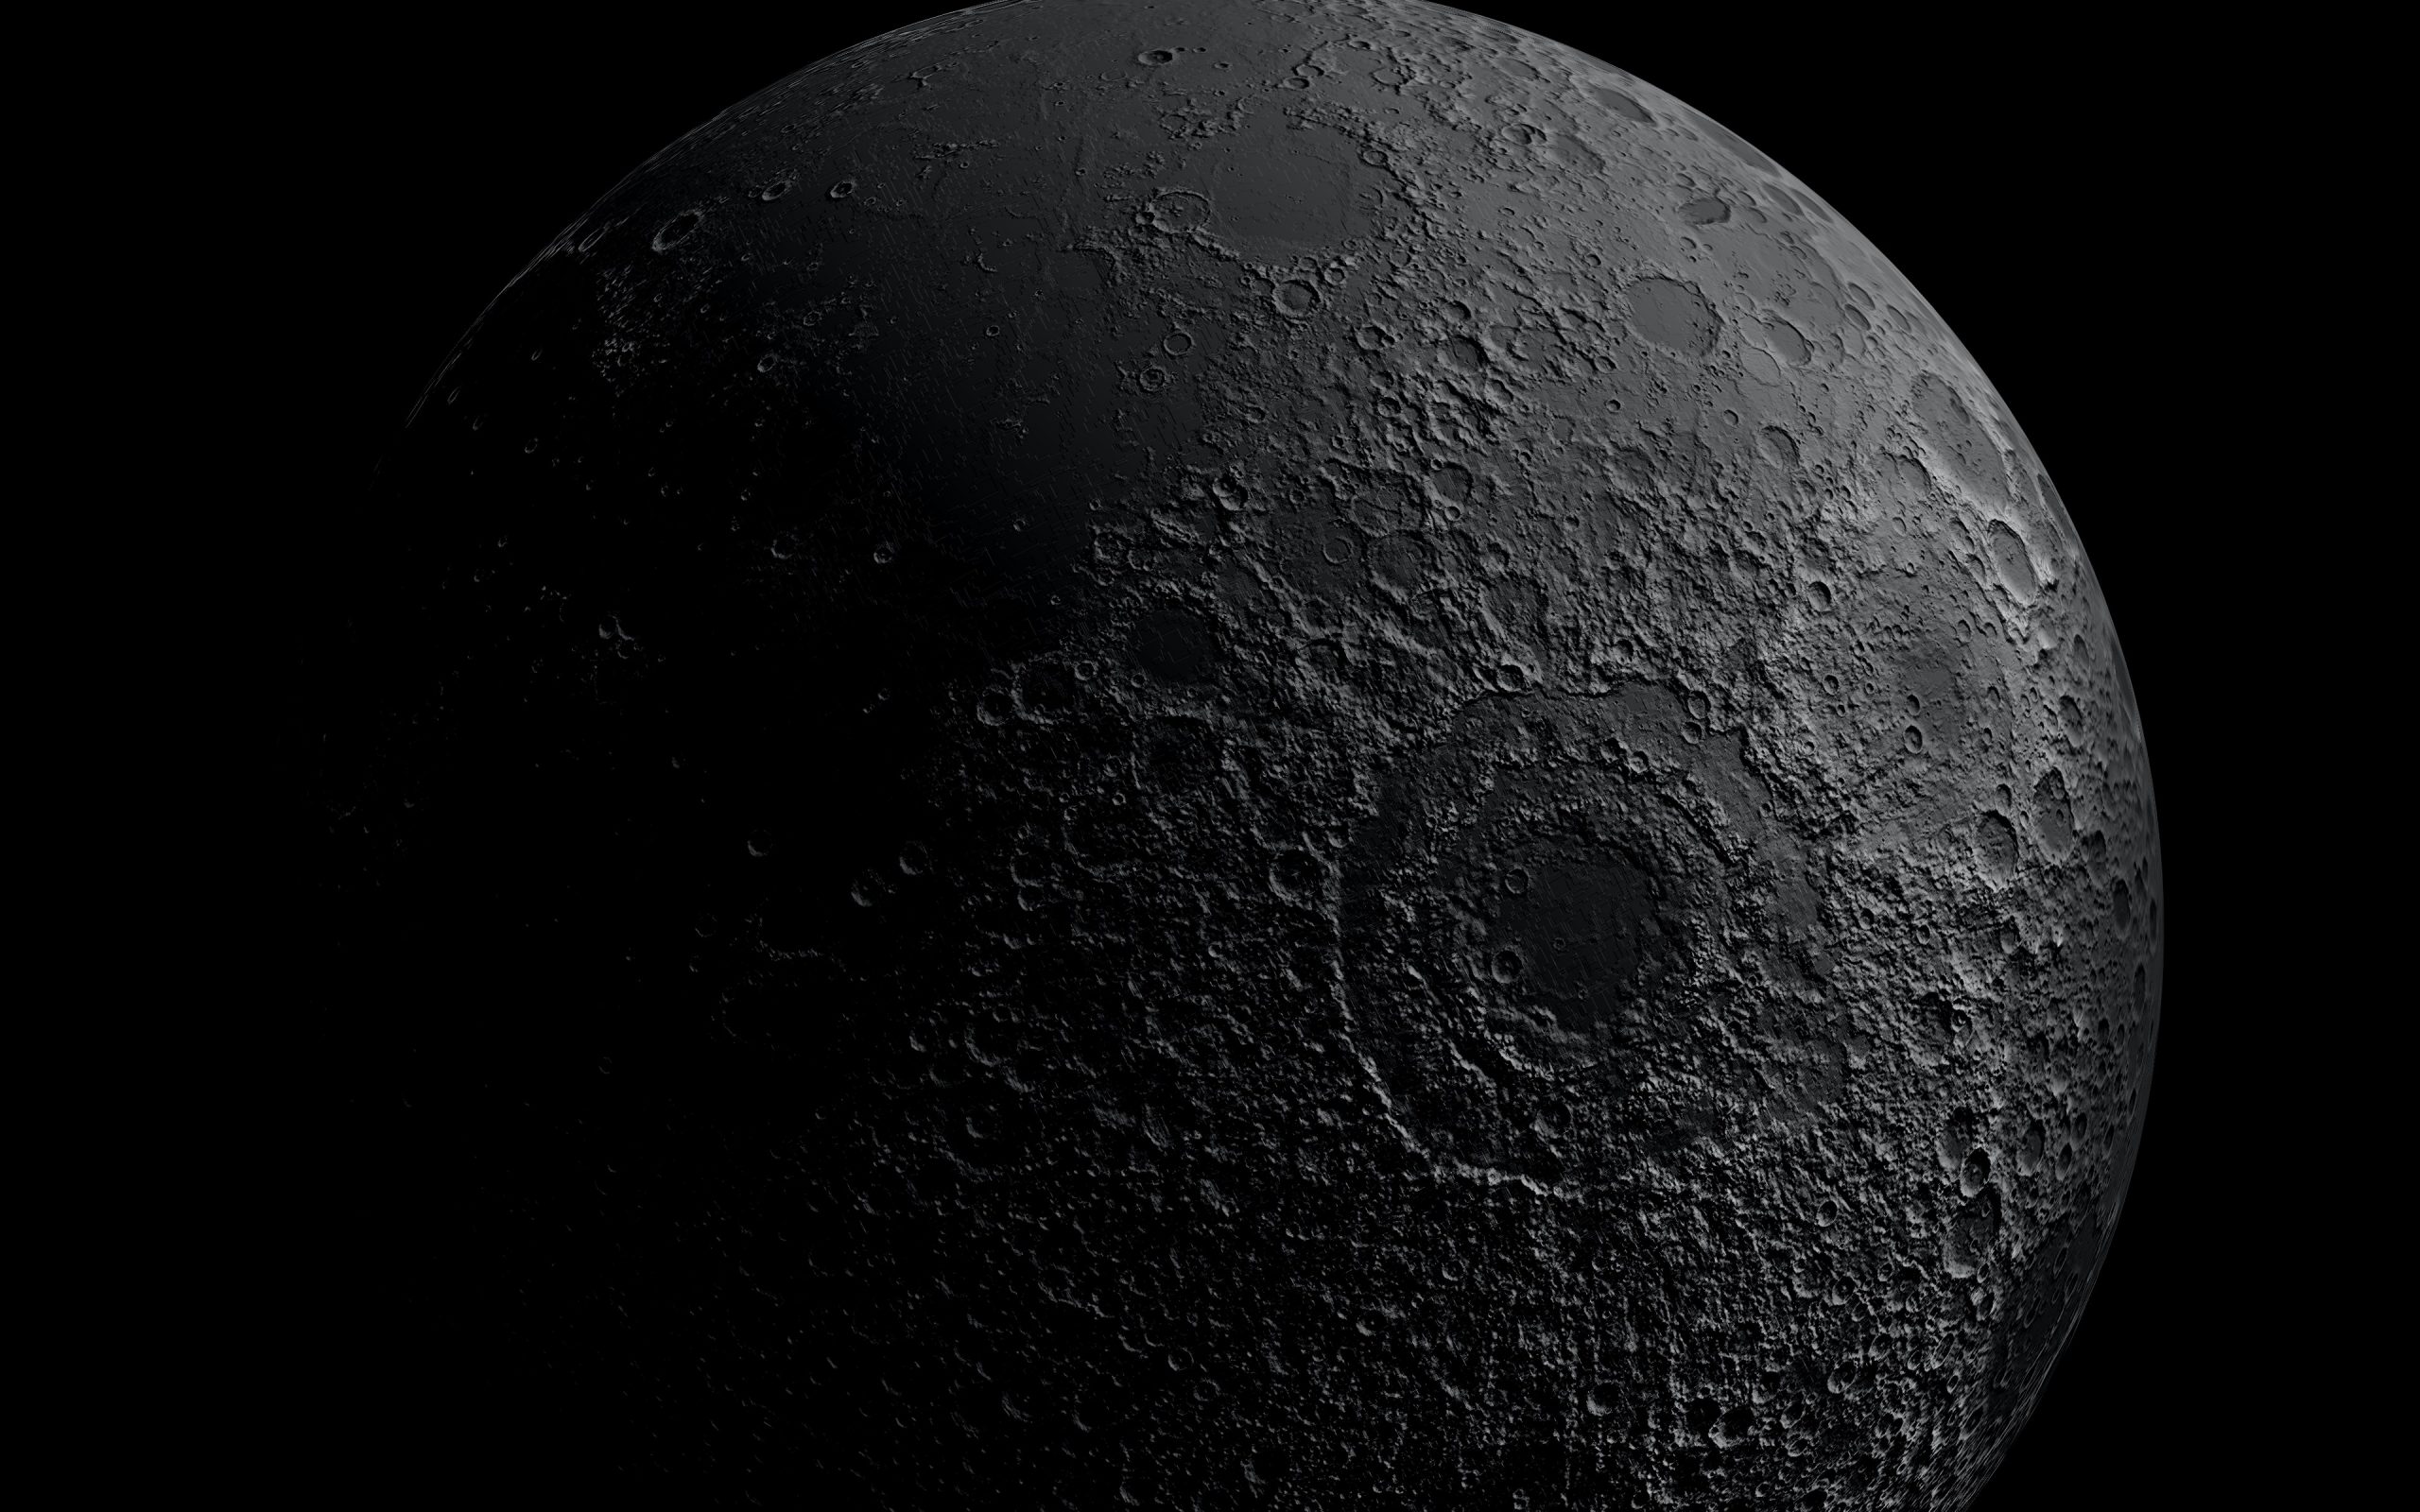 dark side of moon with craters